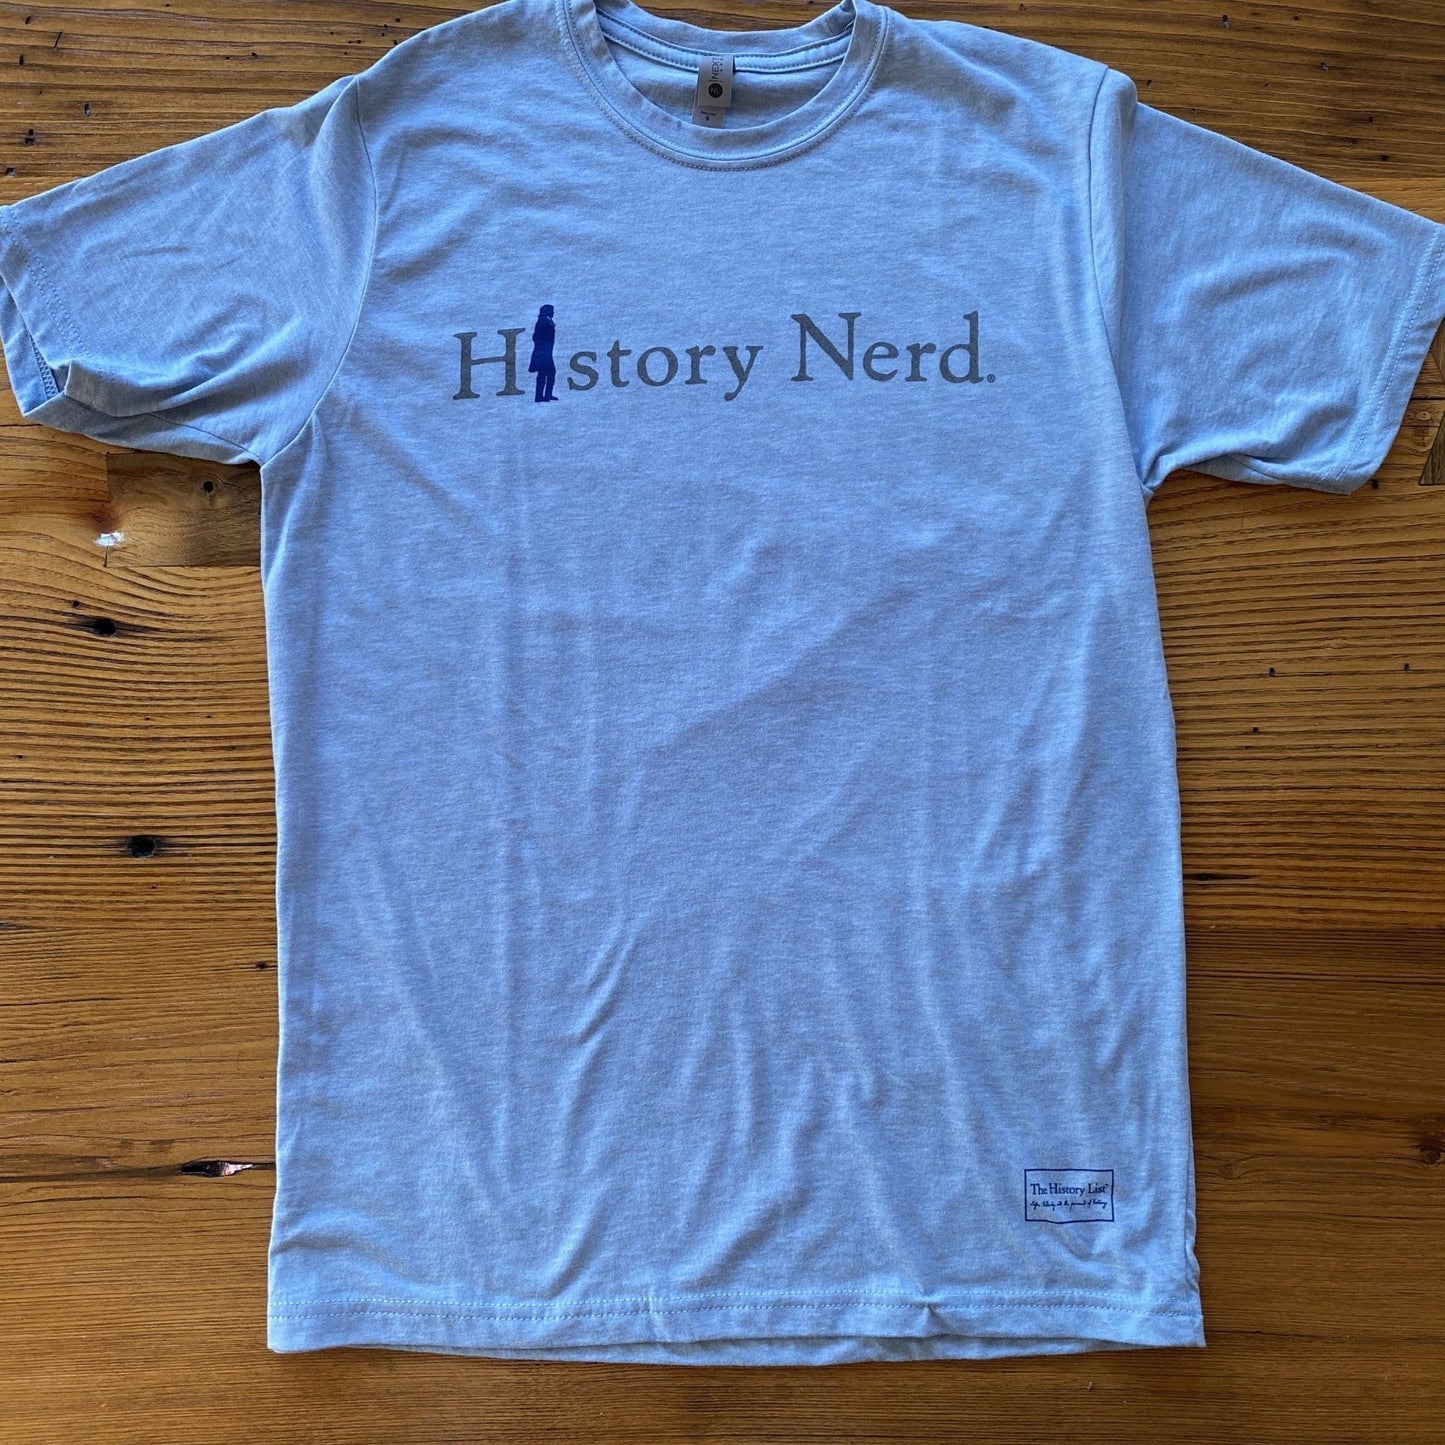 "History Nerd" shirt with Thomas Jefferson - Light blue heather from the history list store